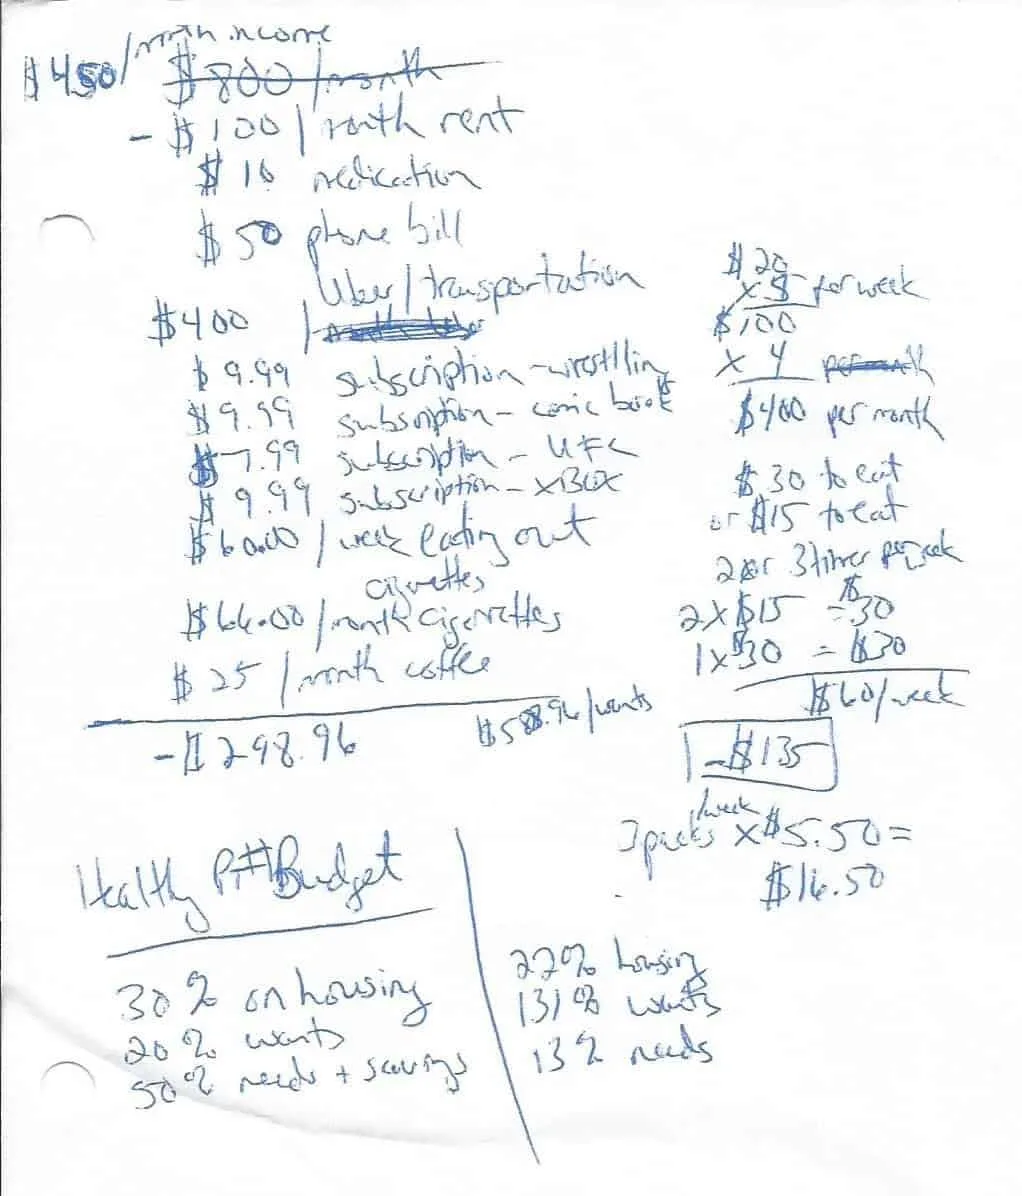 handwritten budget for an 18 year old making $450/month